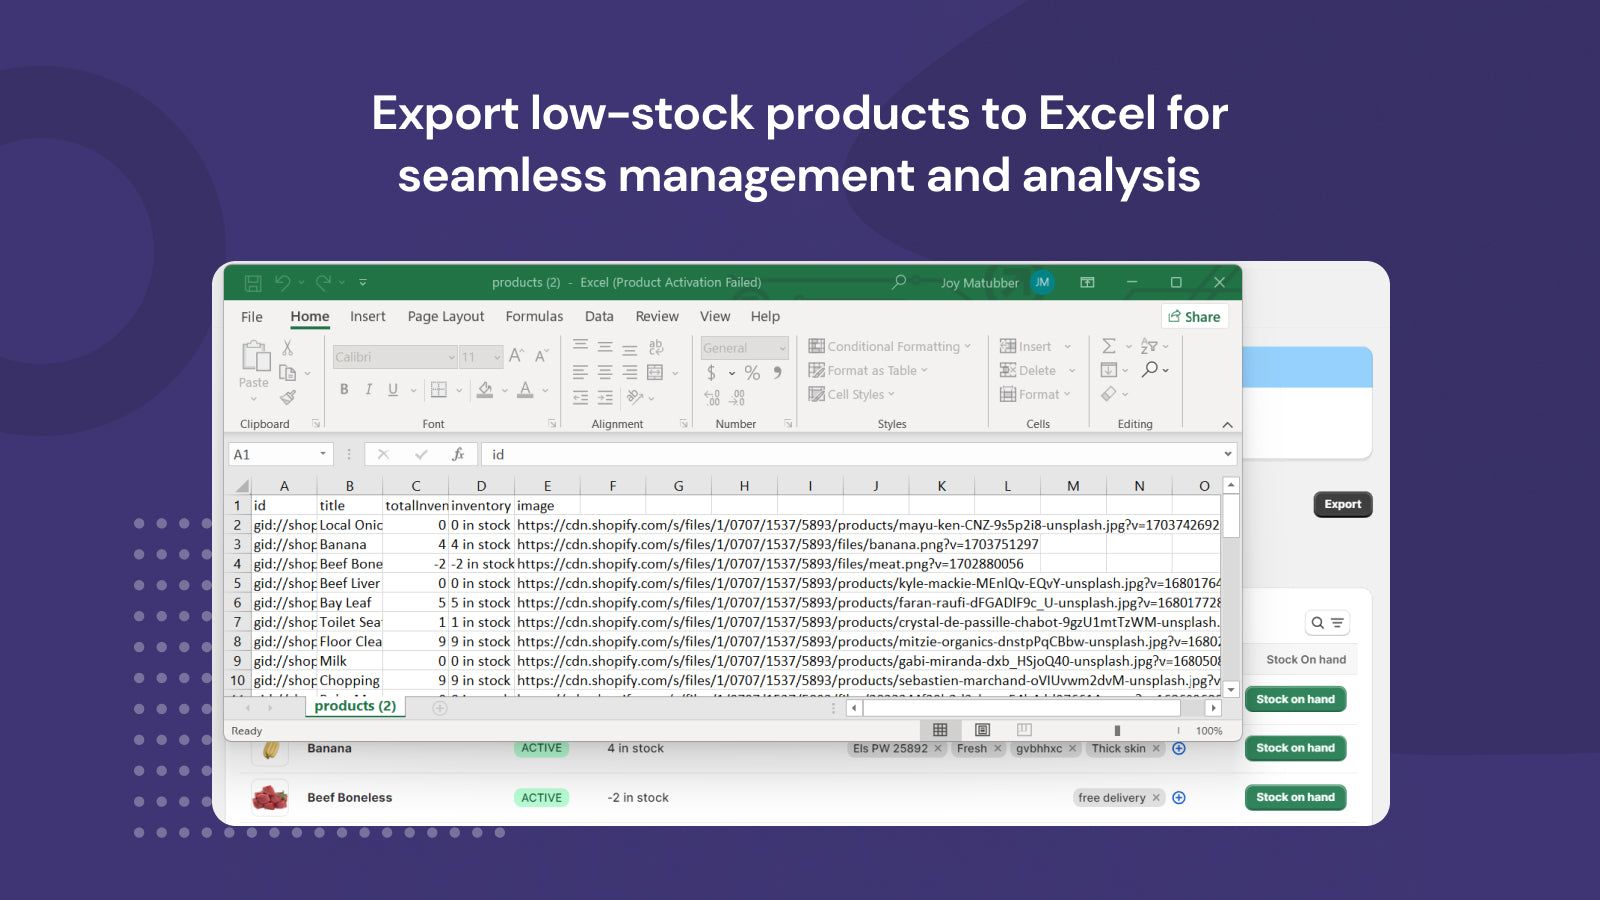 Export low-stock products to Excel